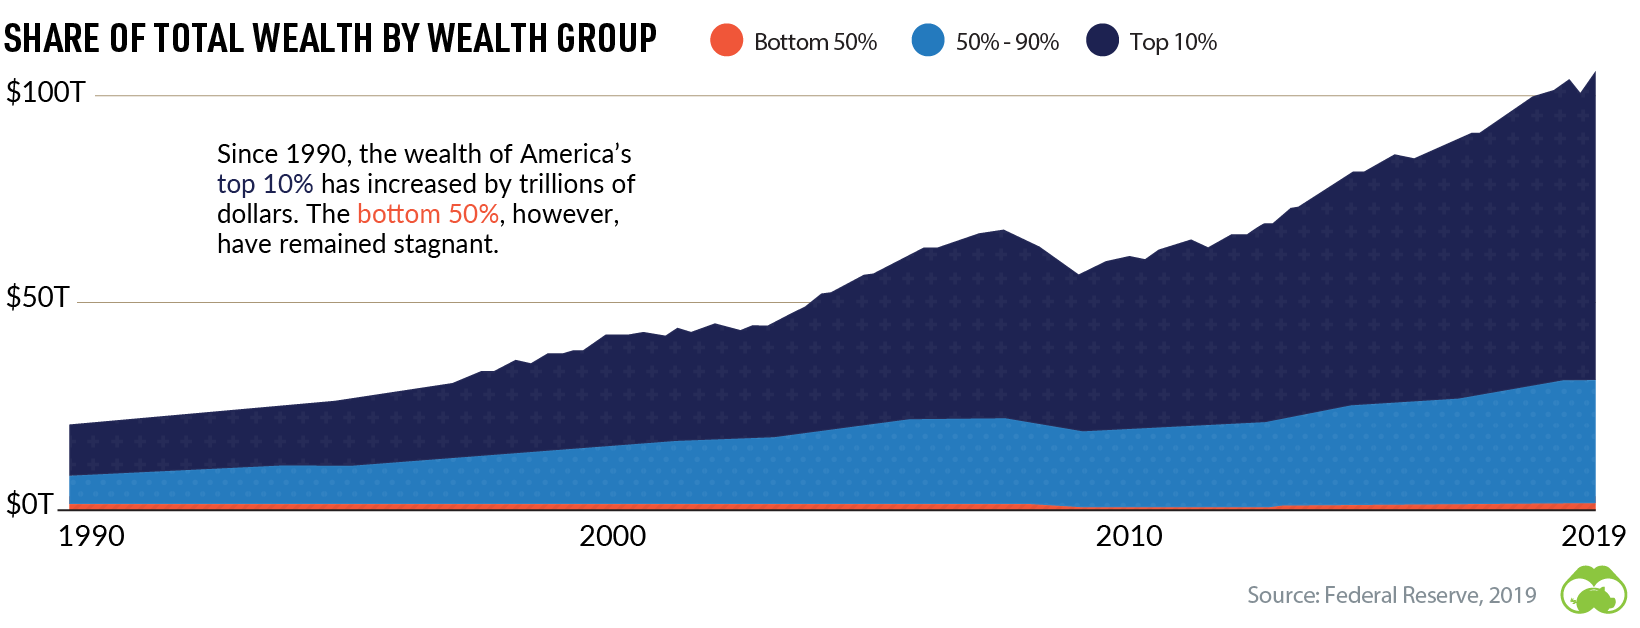 share of total wealth by wealth group